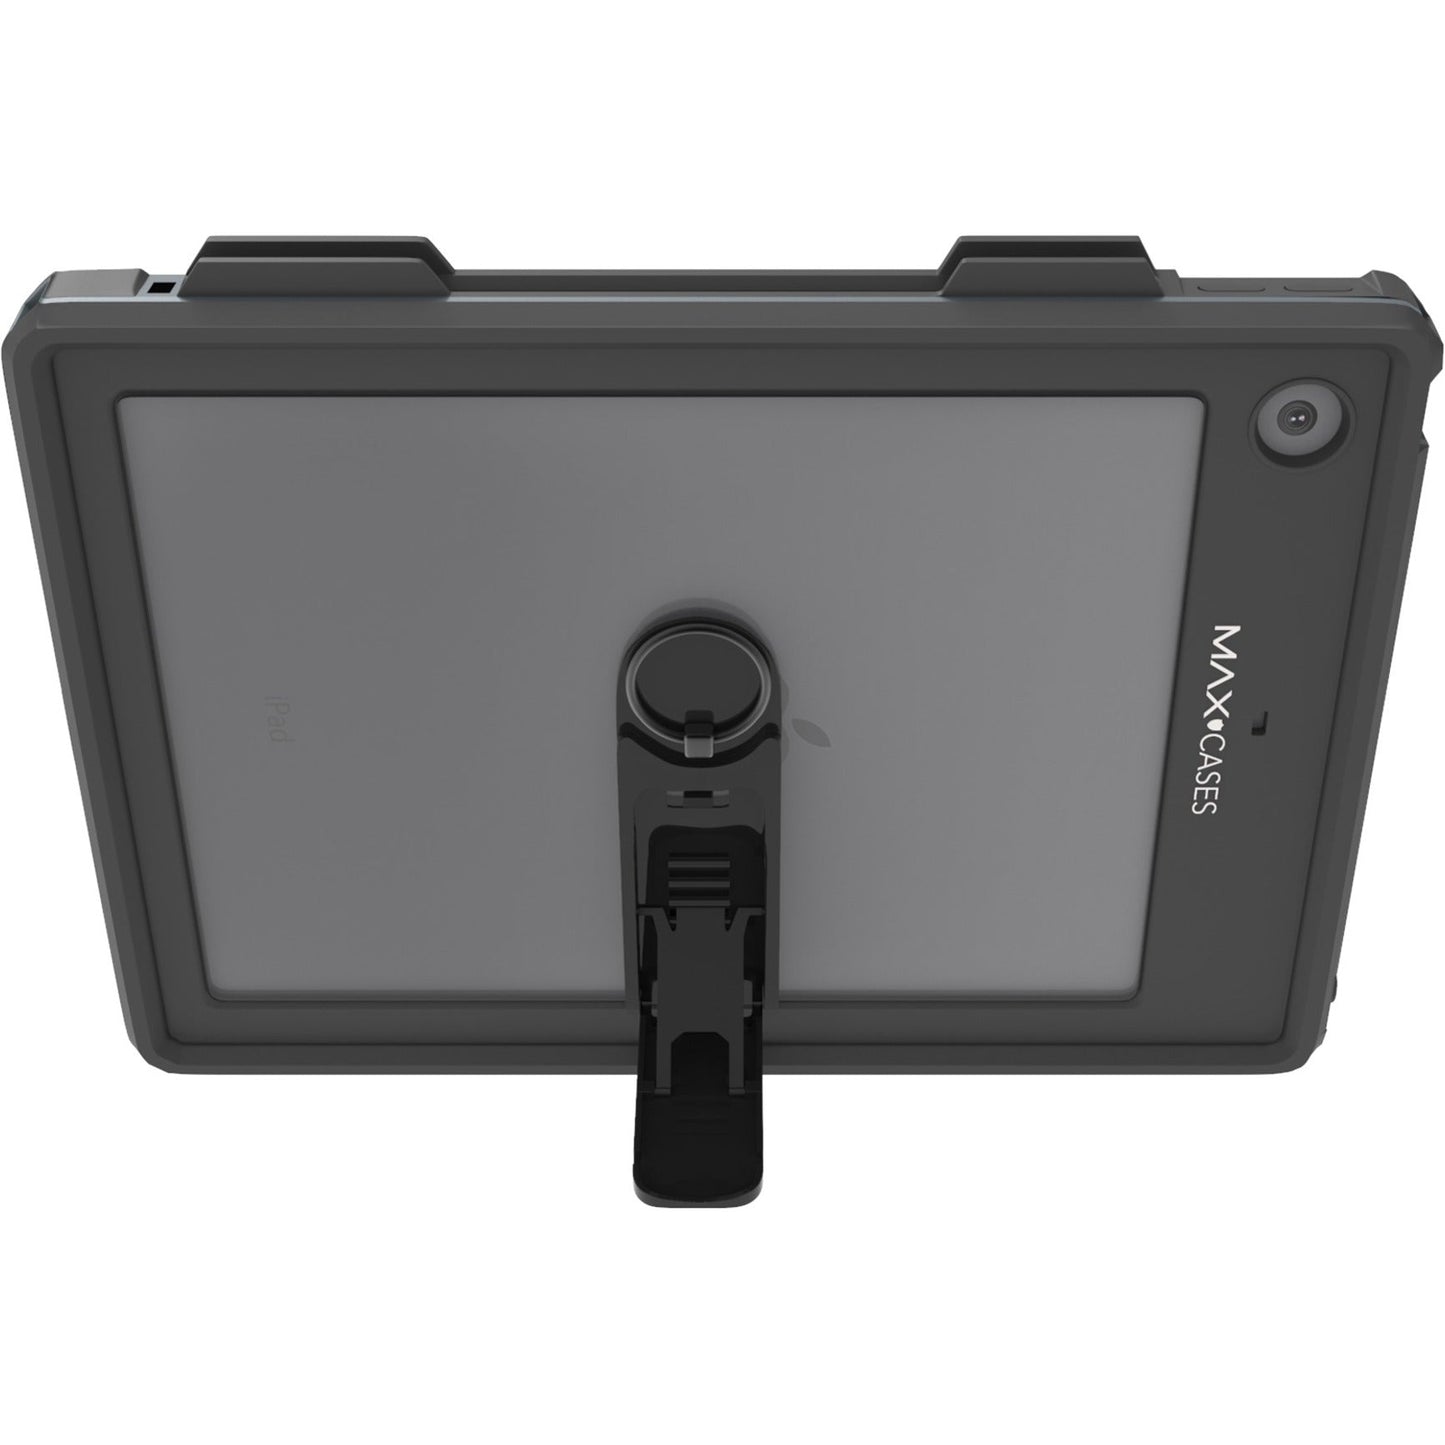 MAXCases Shield Extreme-H Rugged Underwater Case for 10.2" Apple iPad (7th Generation) iPad (8th Generation) Tablet - Black